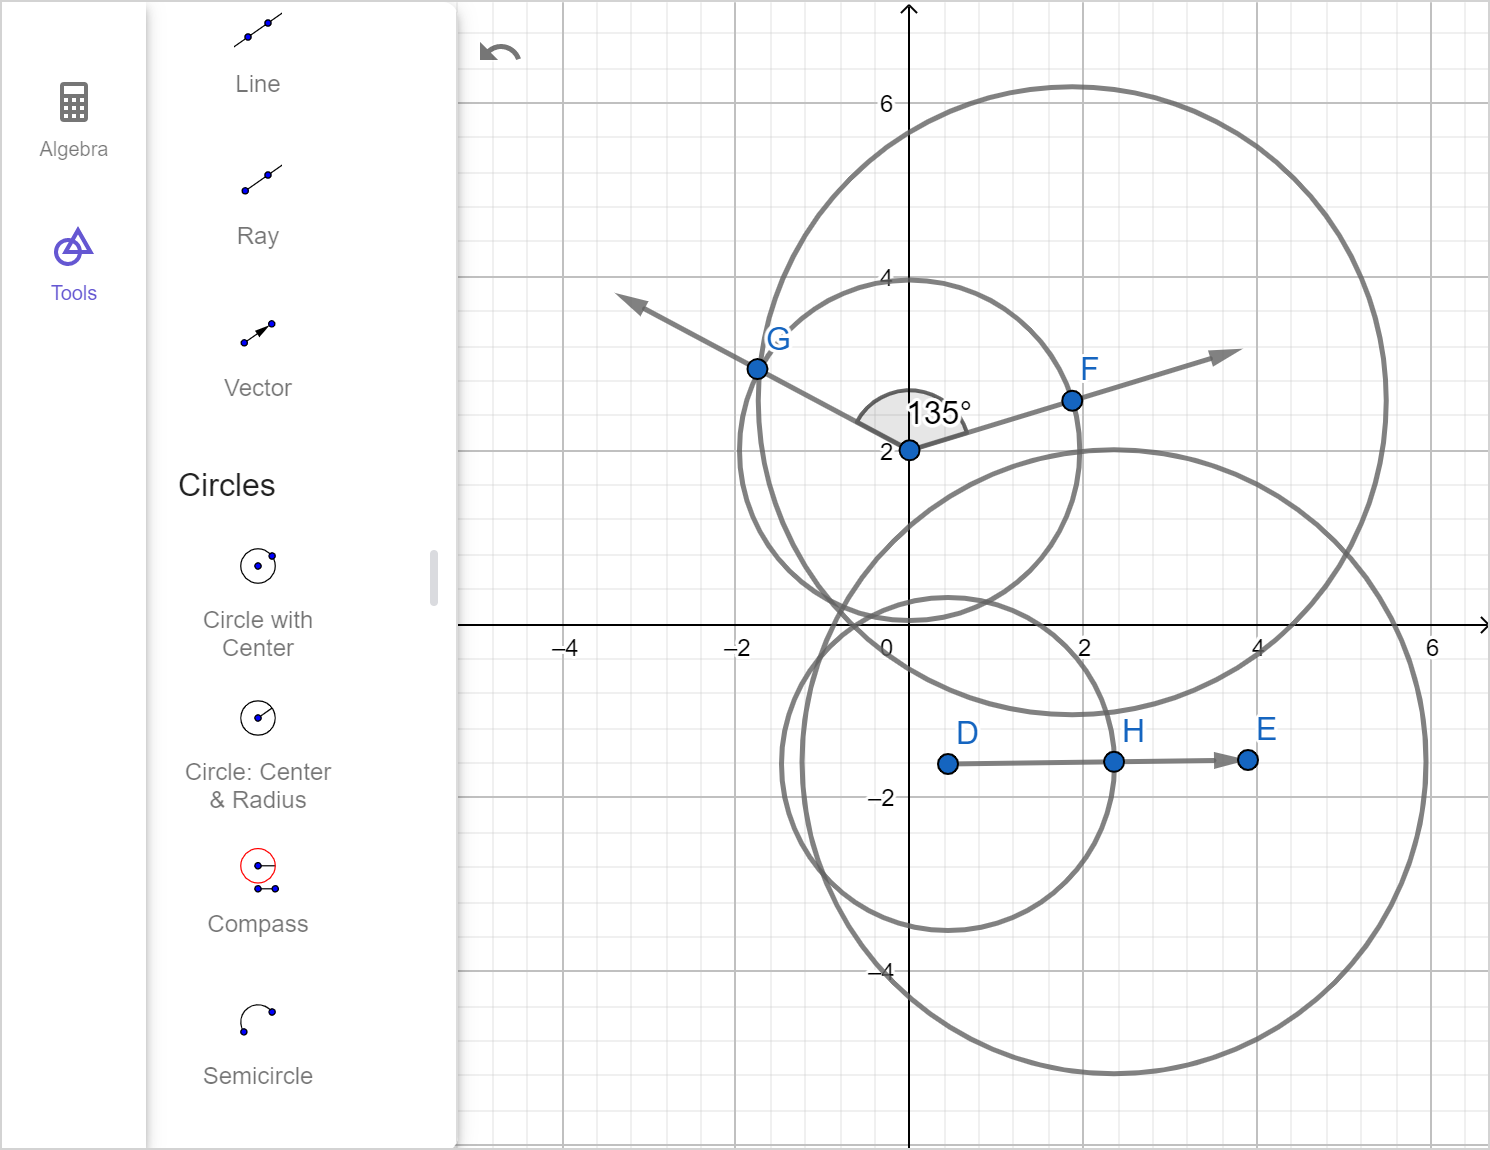 A screenshot of the GeoGebra geometry tool showing the previous image with an additional circle drawn centered at one of the other points of intersection. Speak to your teacher for more details.